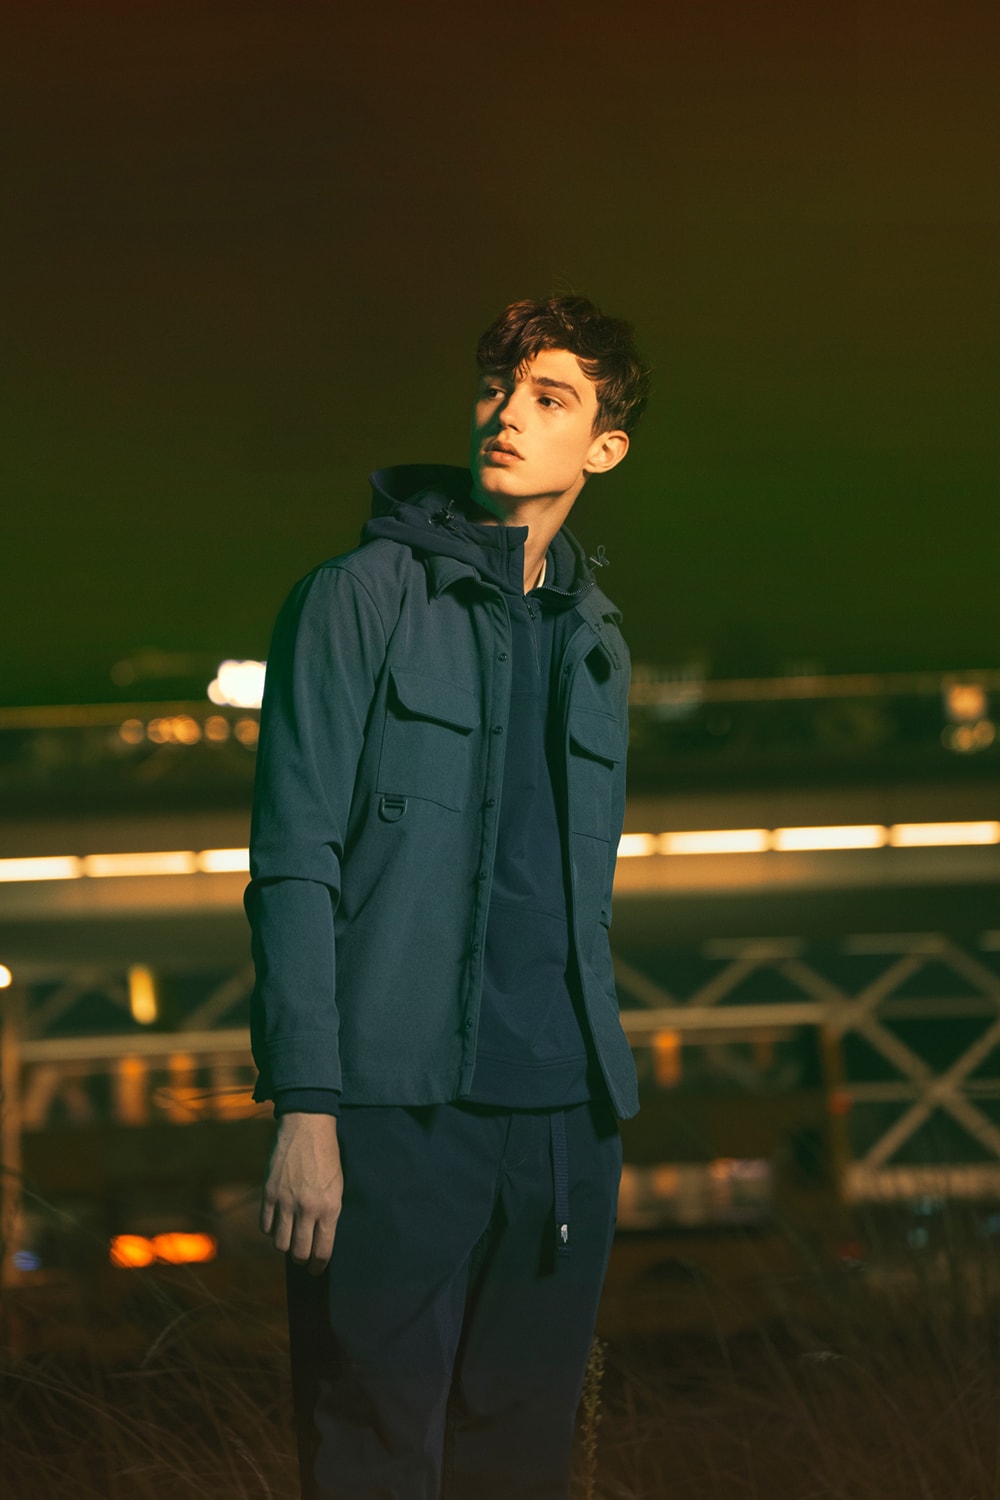 The North Face Urban Exploration 秋冬膠囊系列「Dusk in Dust」正式登場